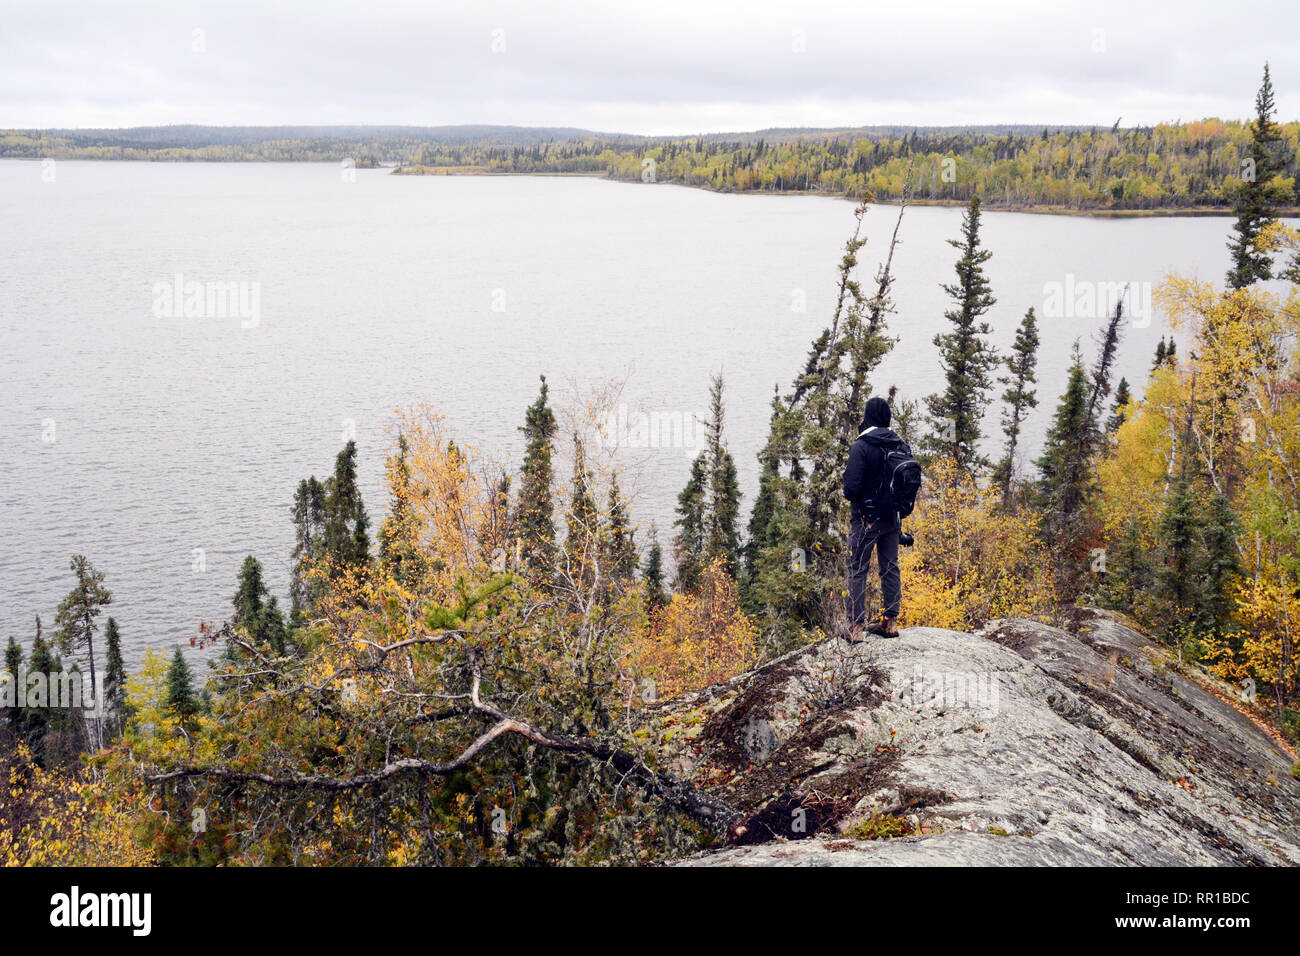 A hiker standing a rocky bluff in the Canadian Shield, above Otter Lake and the fall colours of the boreal forest in northern Saskatchewan, Canada. Stock Photo